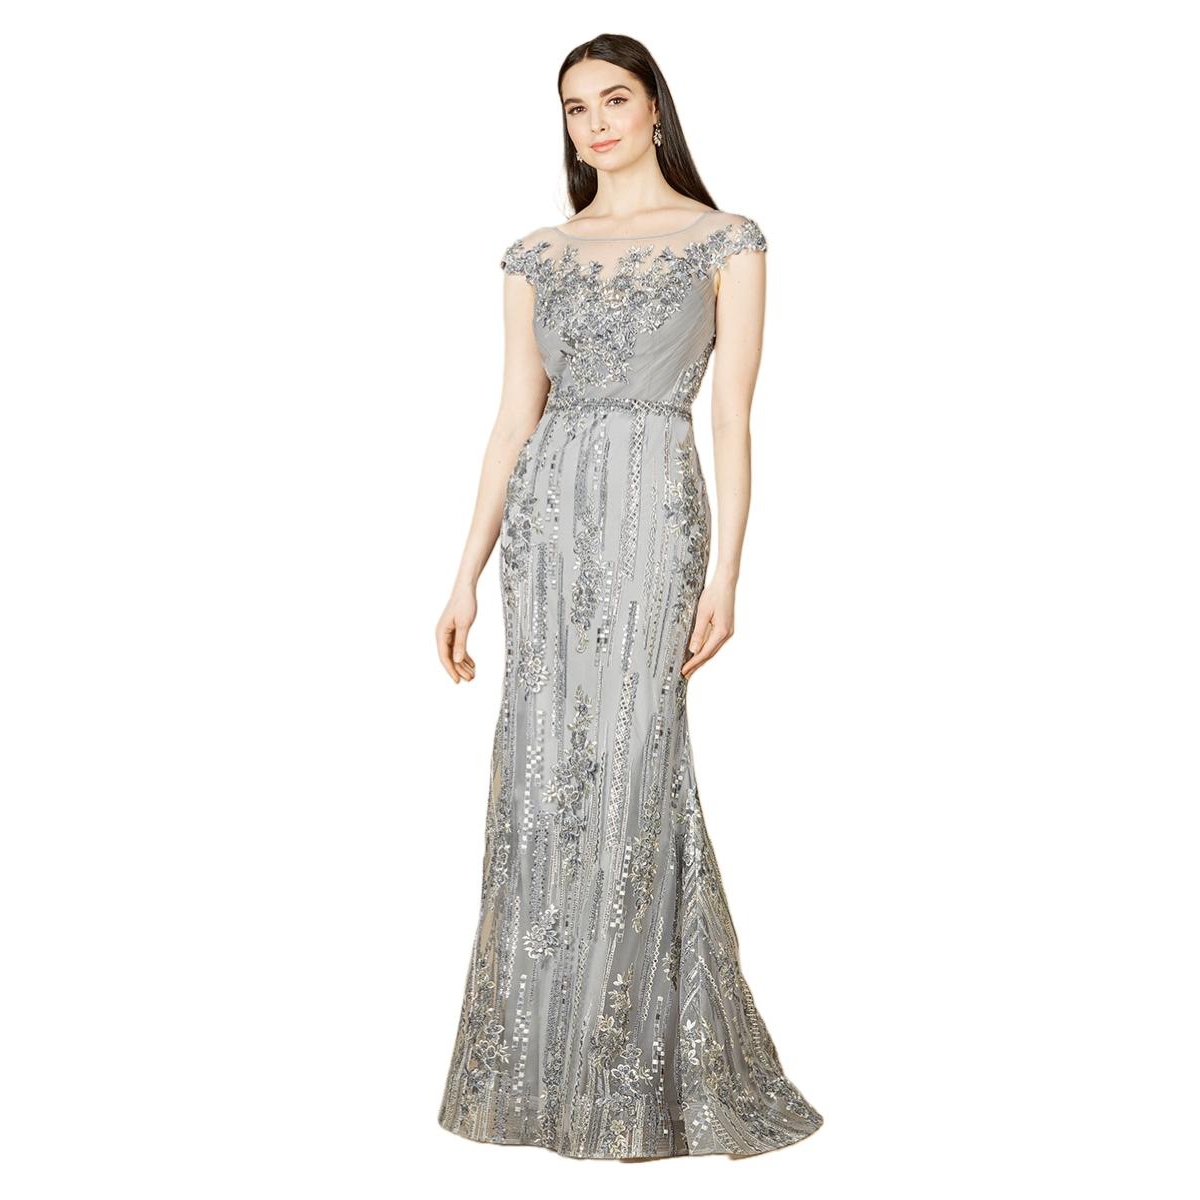 Women's Cap Sleeve, Mermaid Lace Gown with Boat Neck - Grey